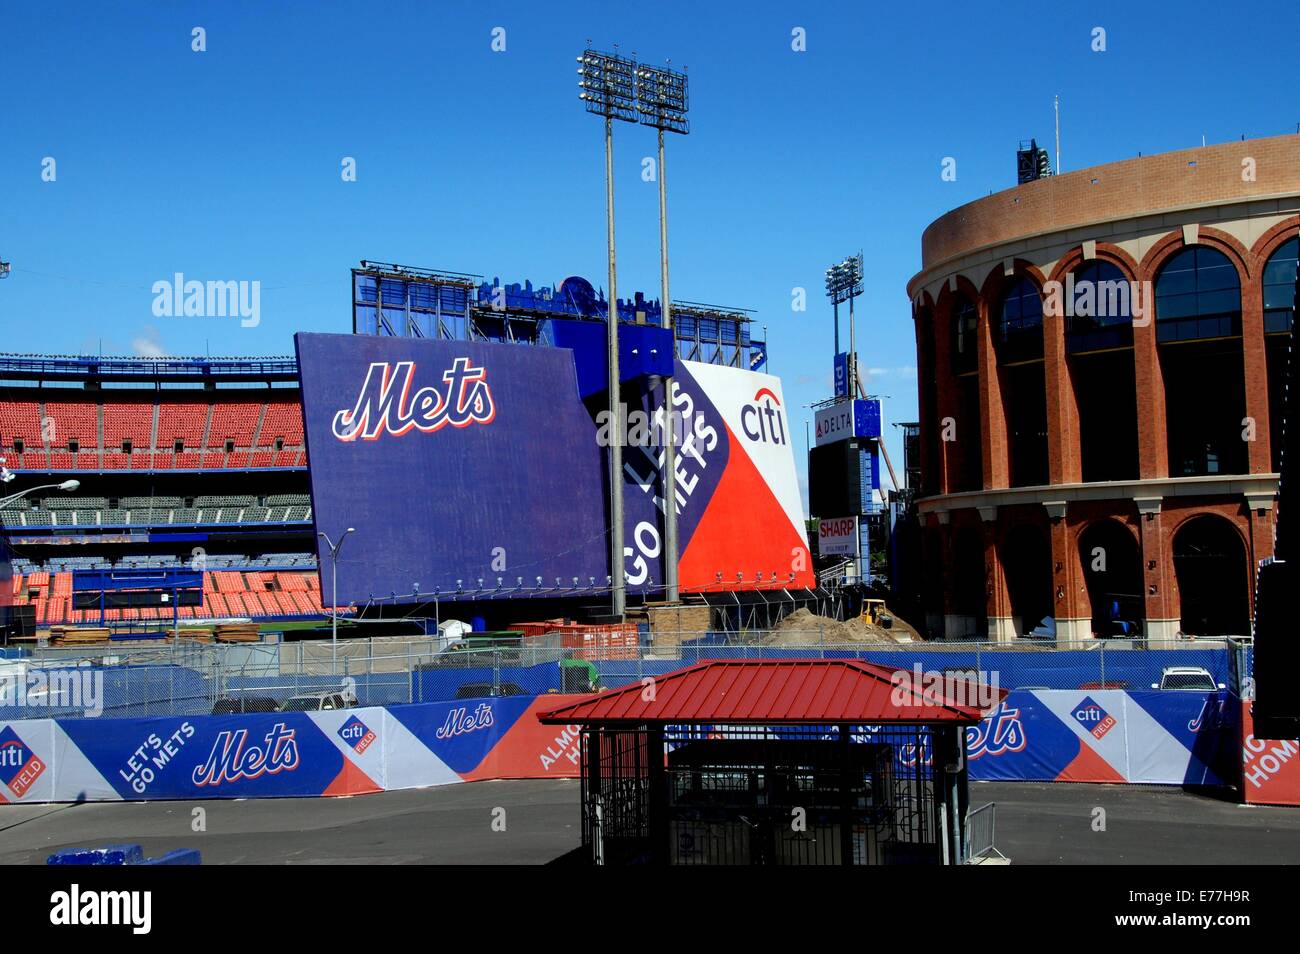 QUEENS, NEW YORK:  Two Shea Stadiums, home of the New York Mets baseball team - the old one on left and  new Citifield Stadium Stock Photo